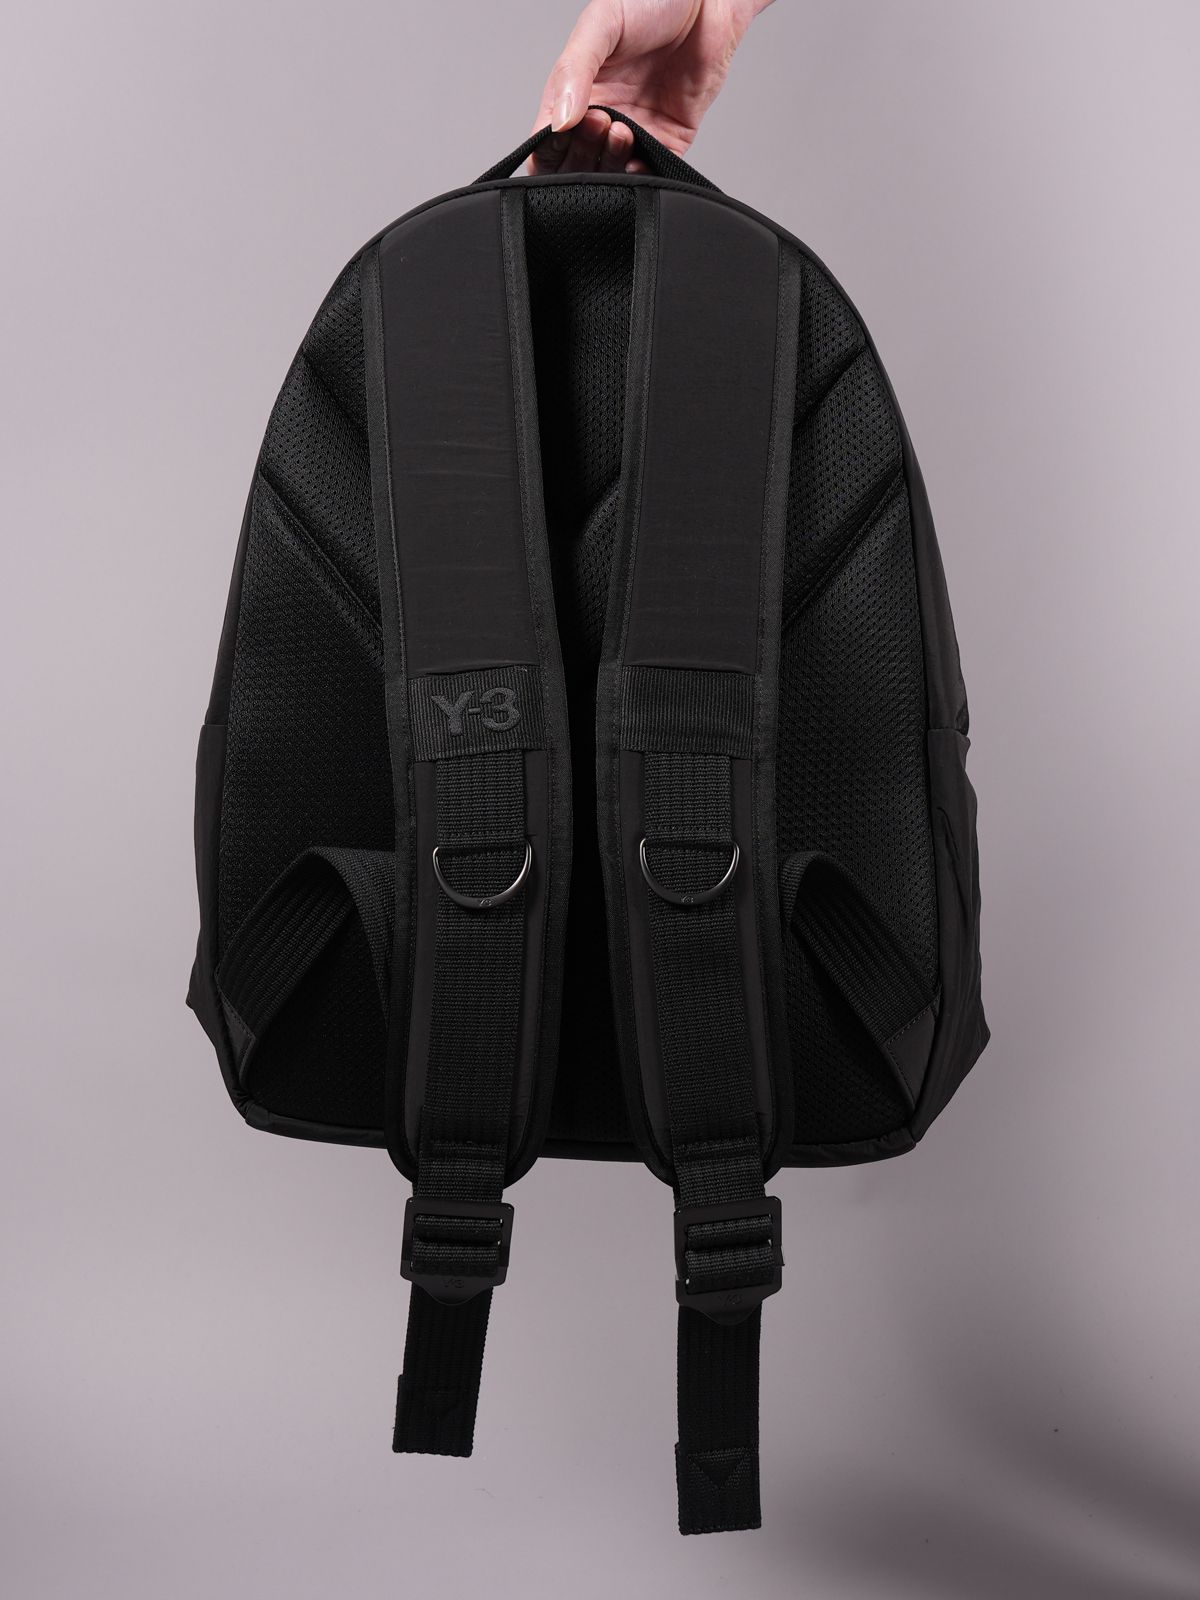 Y-3 - 【ラスト1点】 Y-3 TECH BACKPACK / ワイスリー / テックバック ...